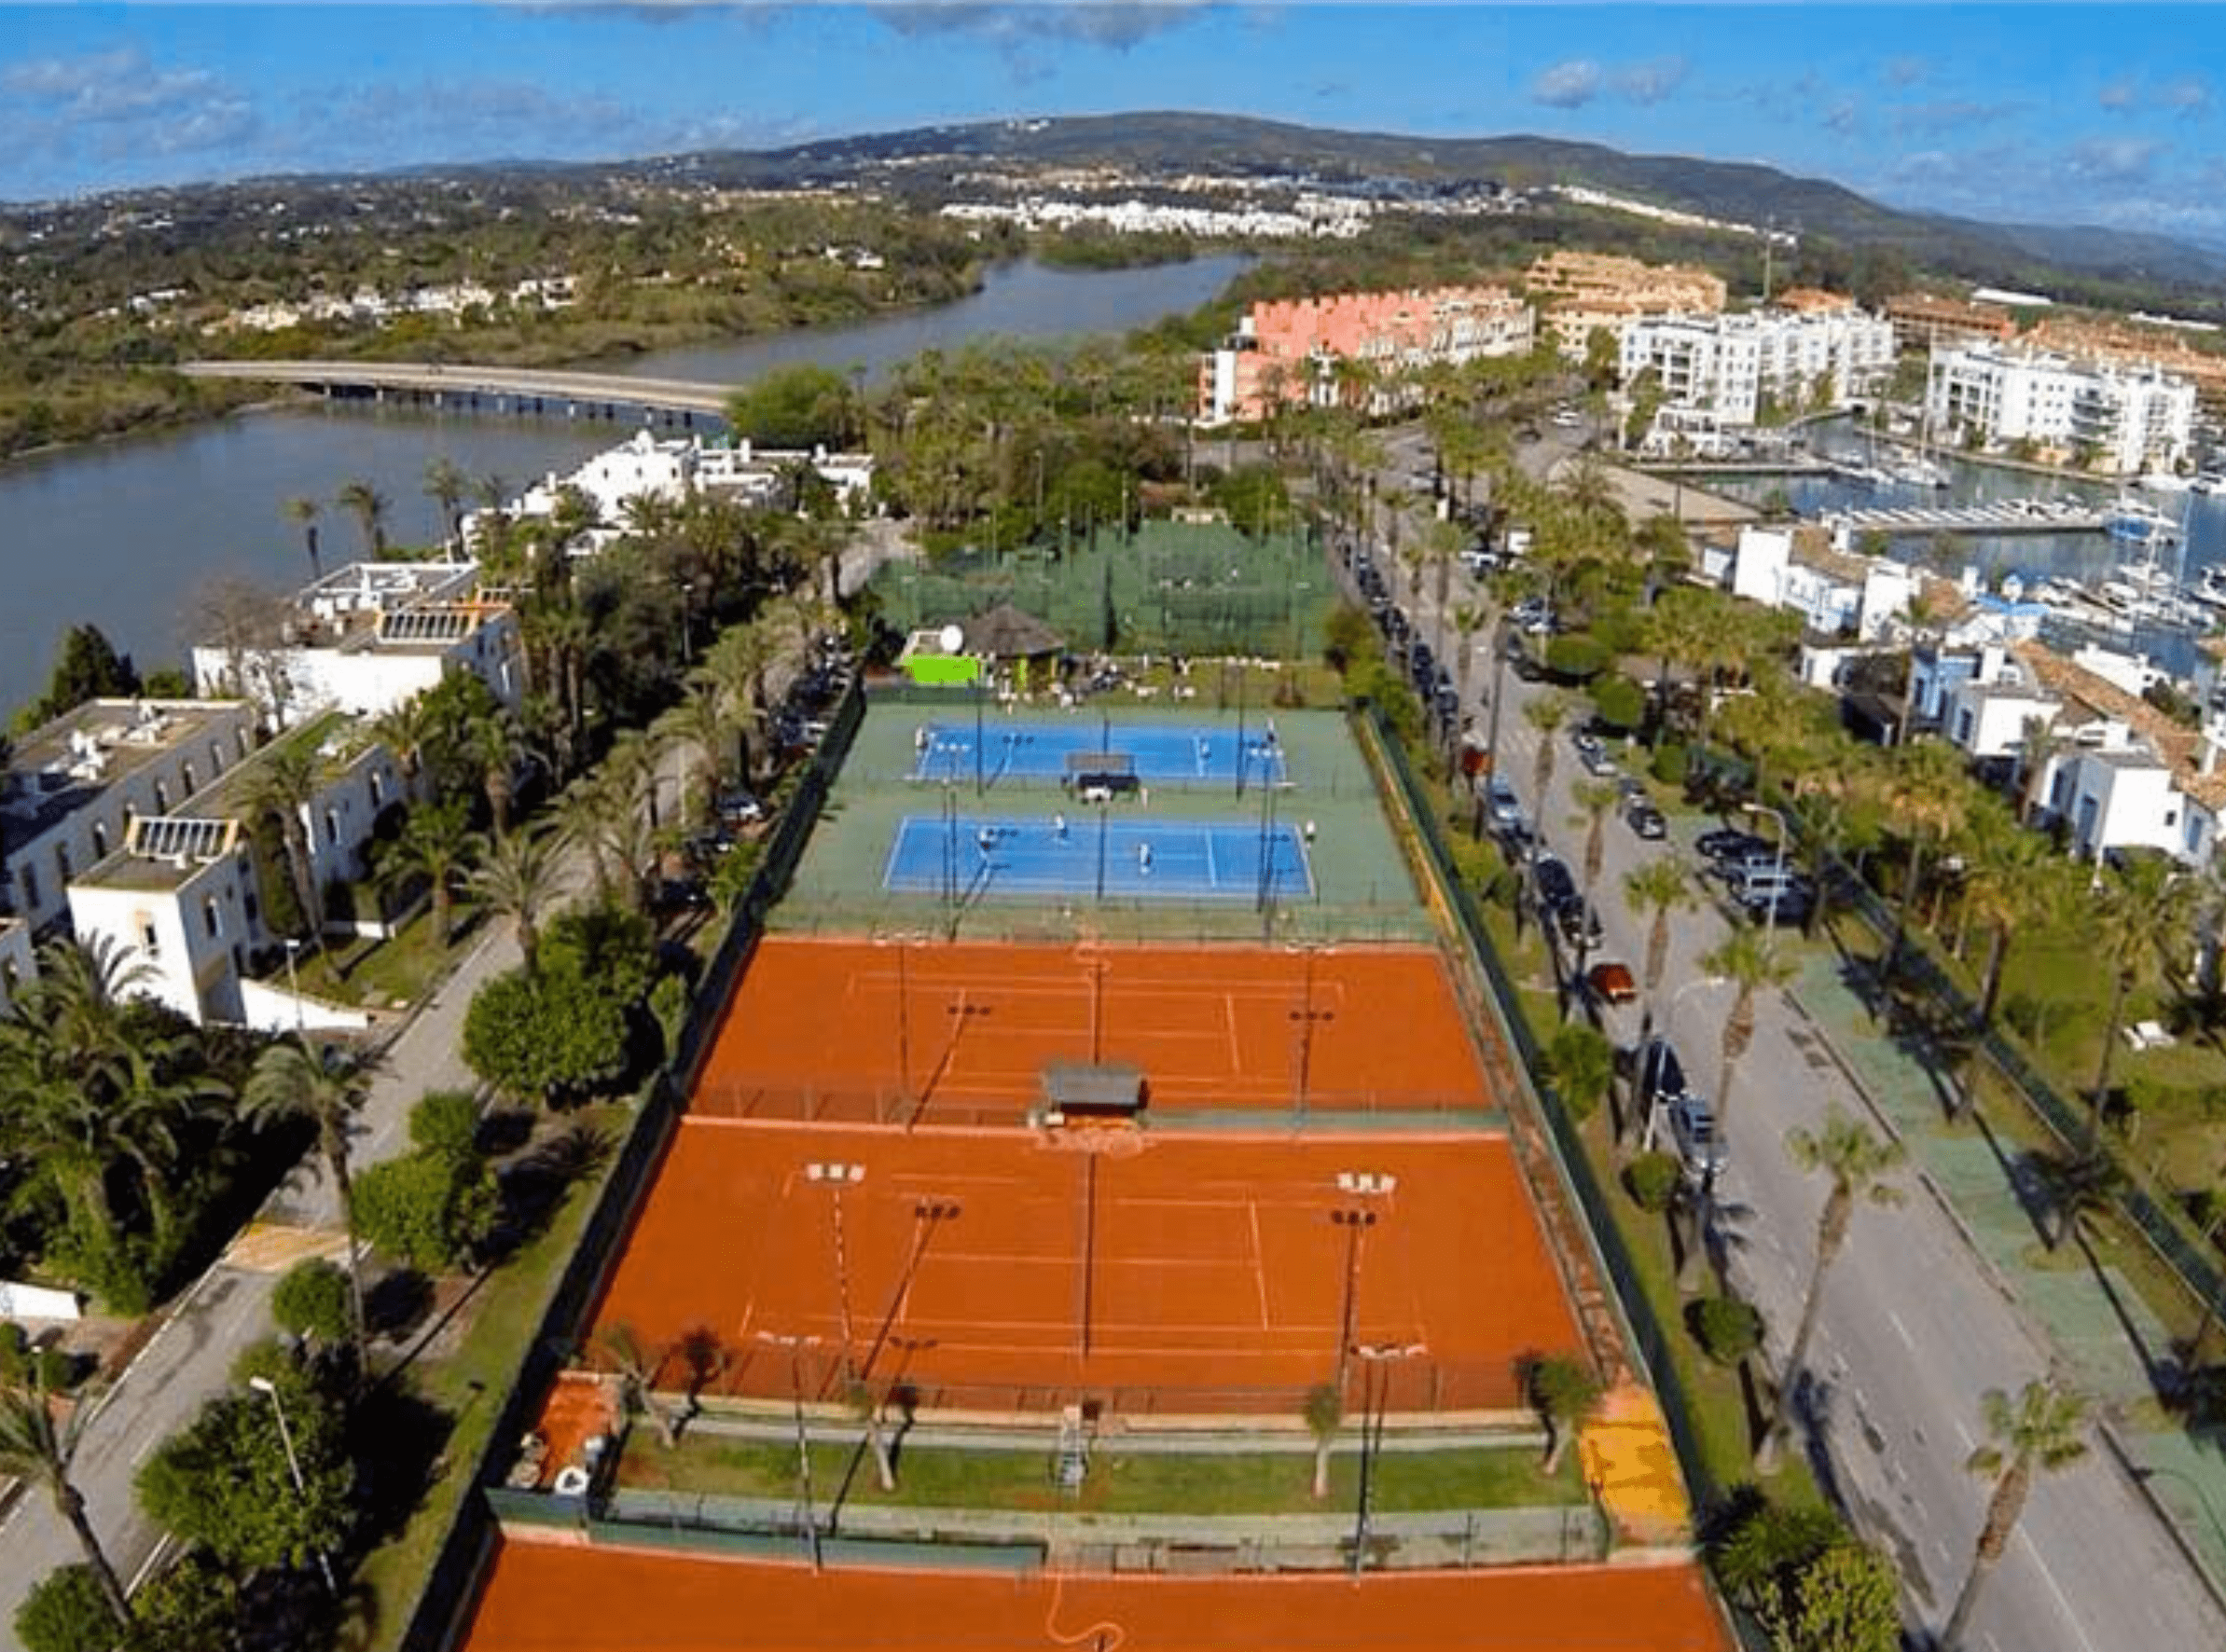 The image depicts a tennis court within the Sotogrande estate, showcasing the premium recreational facilities available to residents and highlighting the lifestyle amenities of this prestigious real estate community.